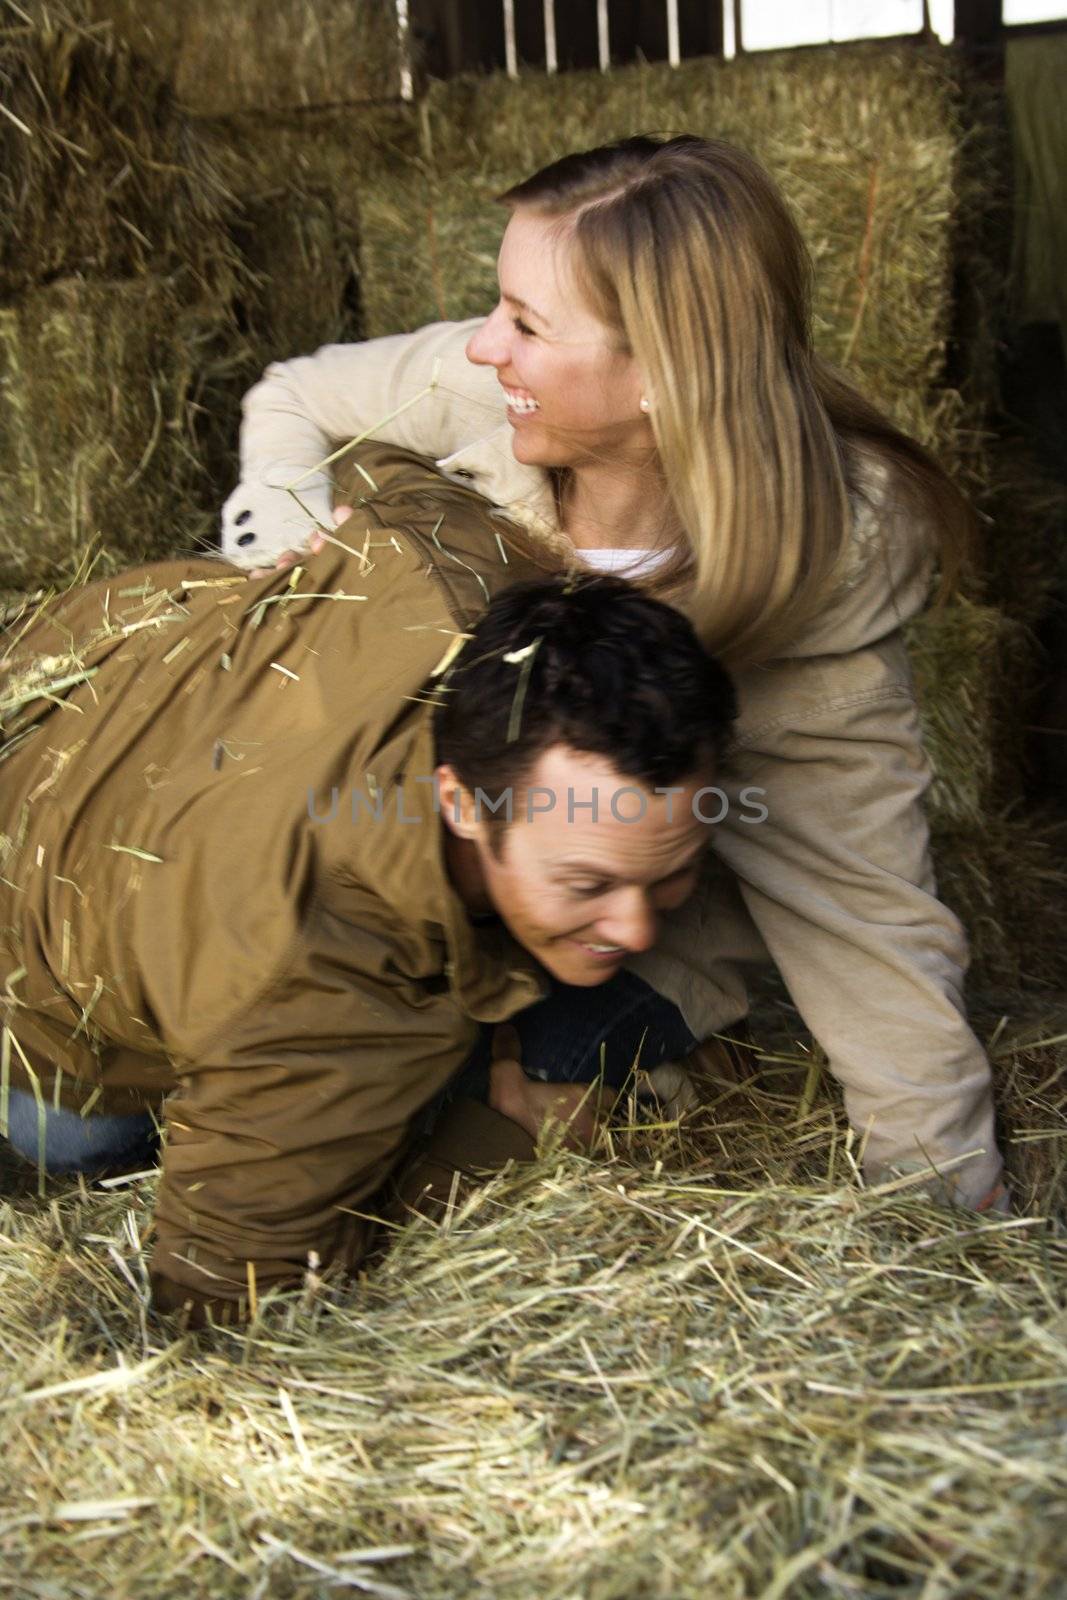 Young adult Caucasian couple playing in hay.